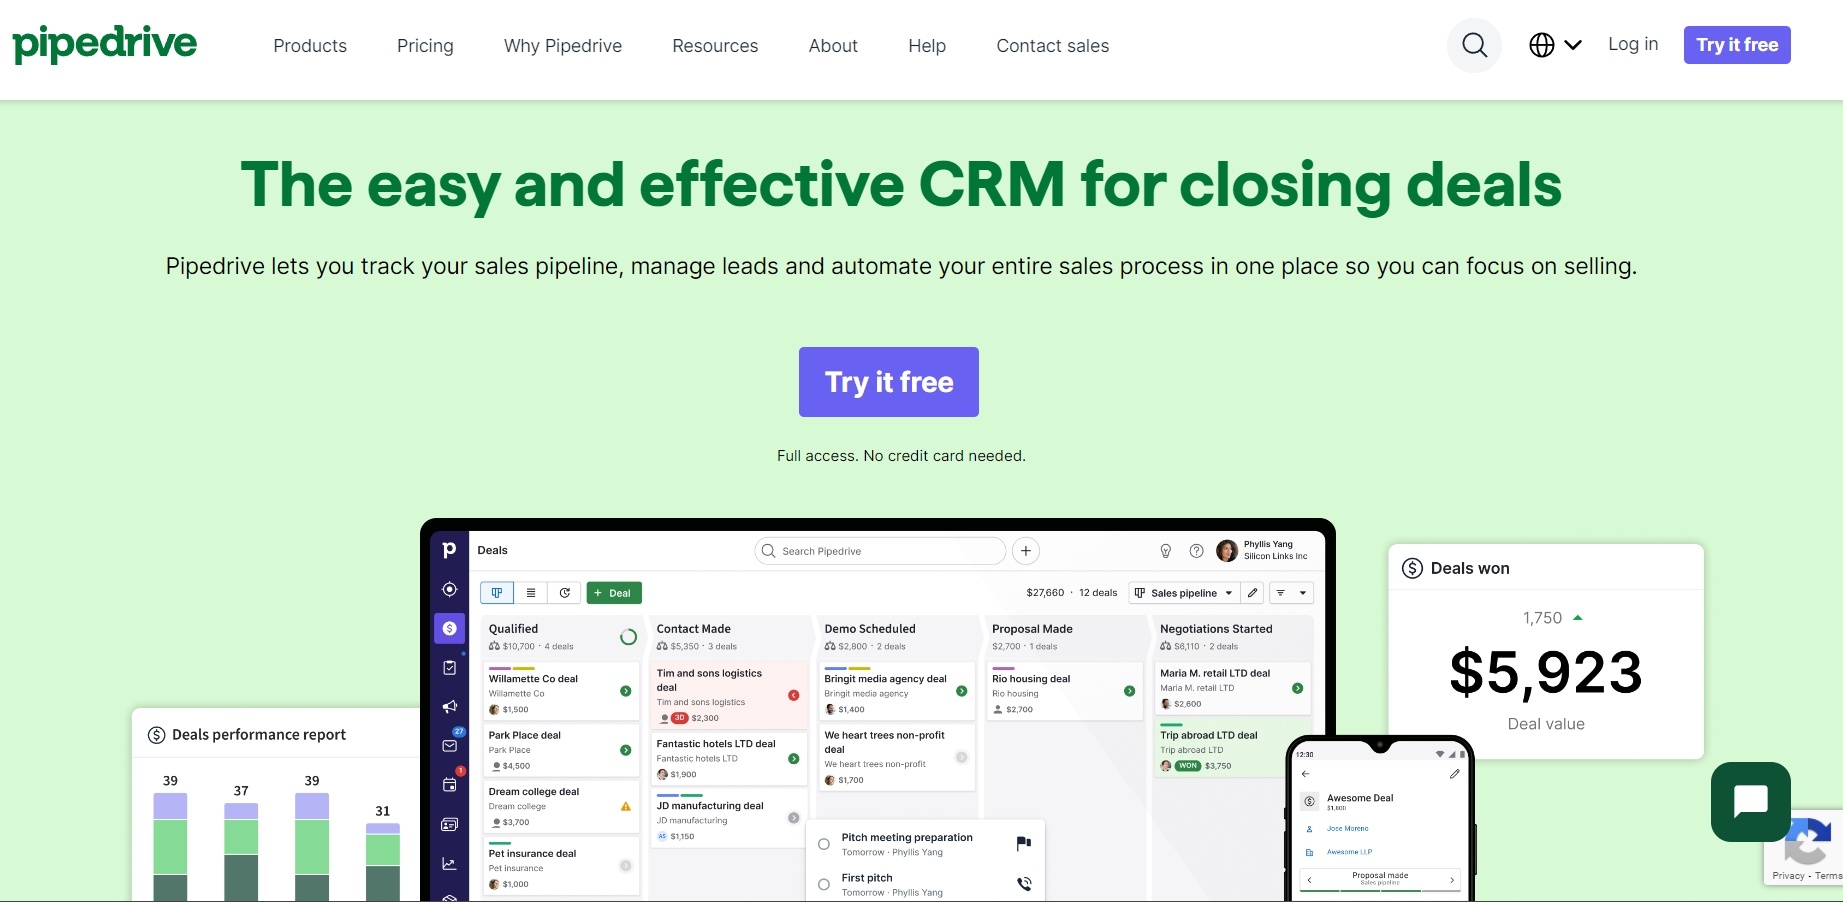 Pipedrive for CRM email automation in closing business deals